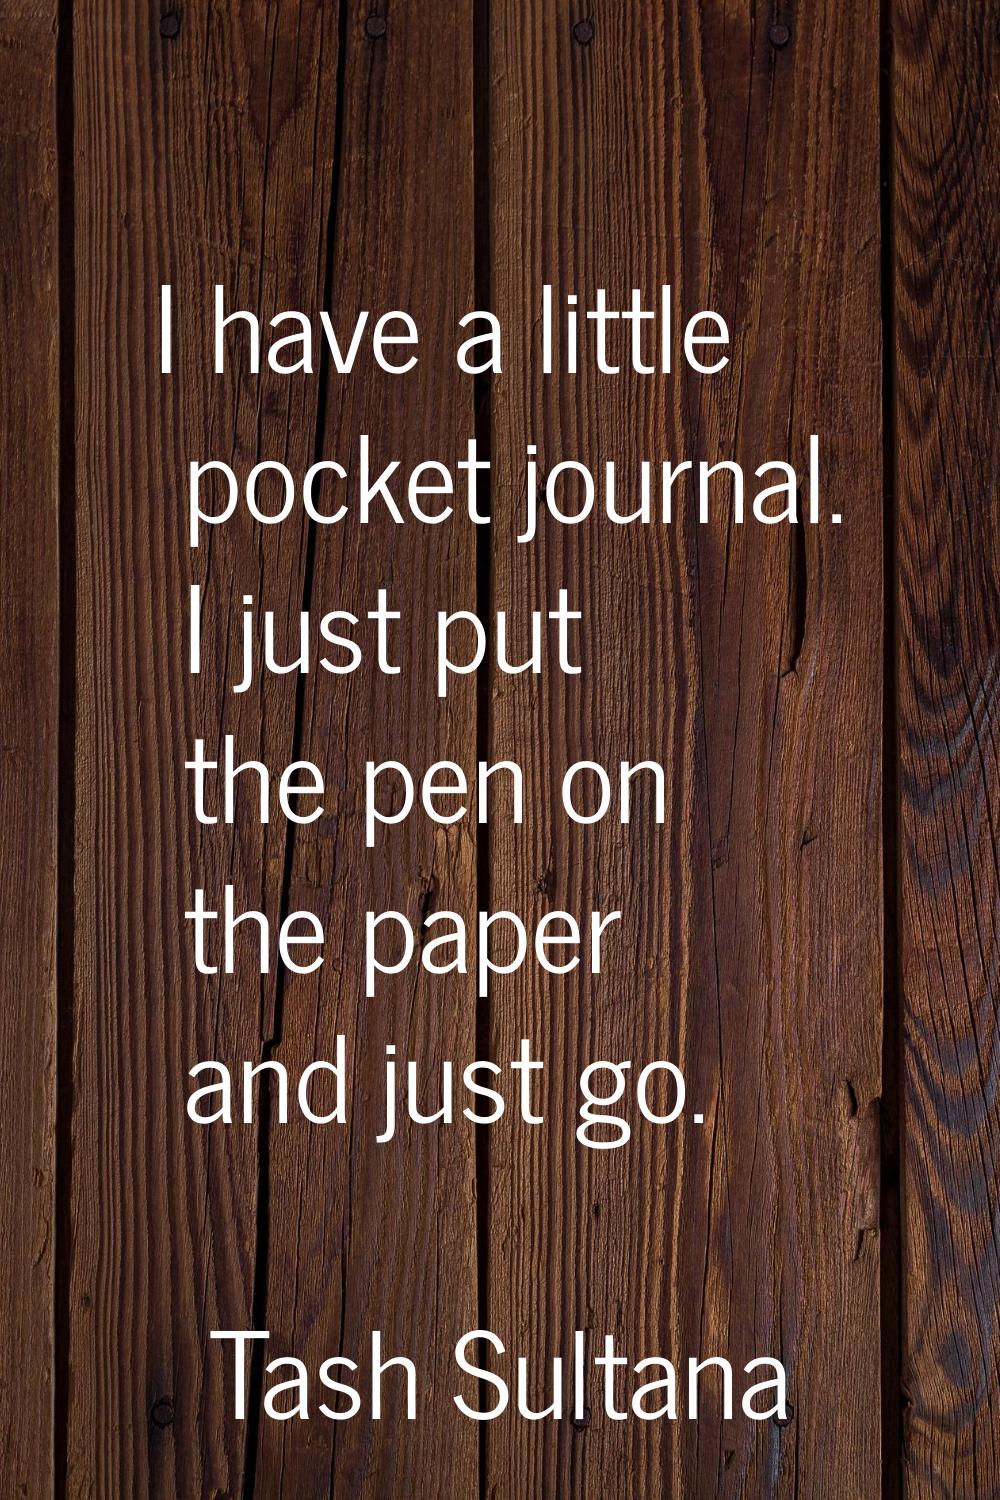 I have a little pocket journal. I just put the pen on the paper and just go.